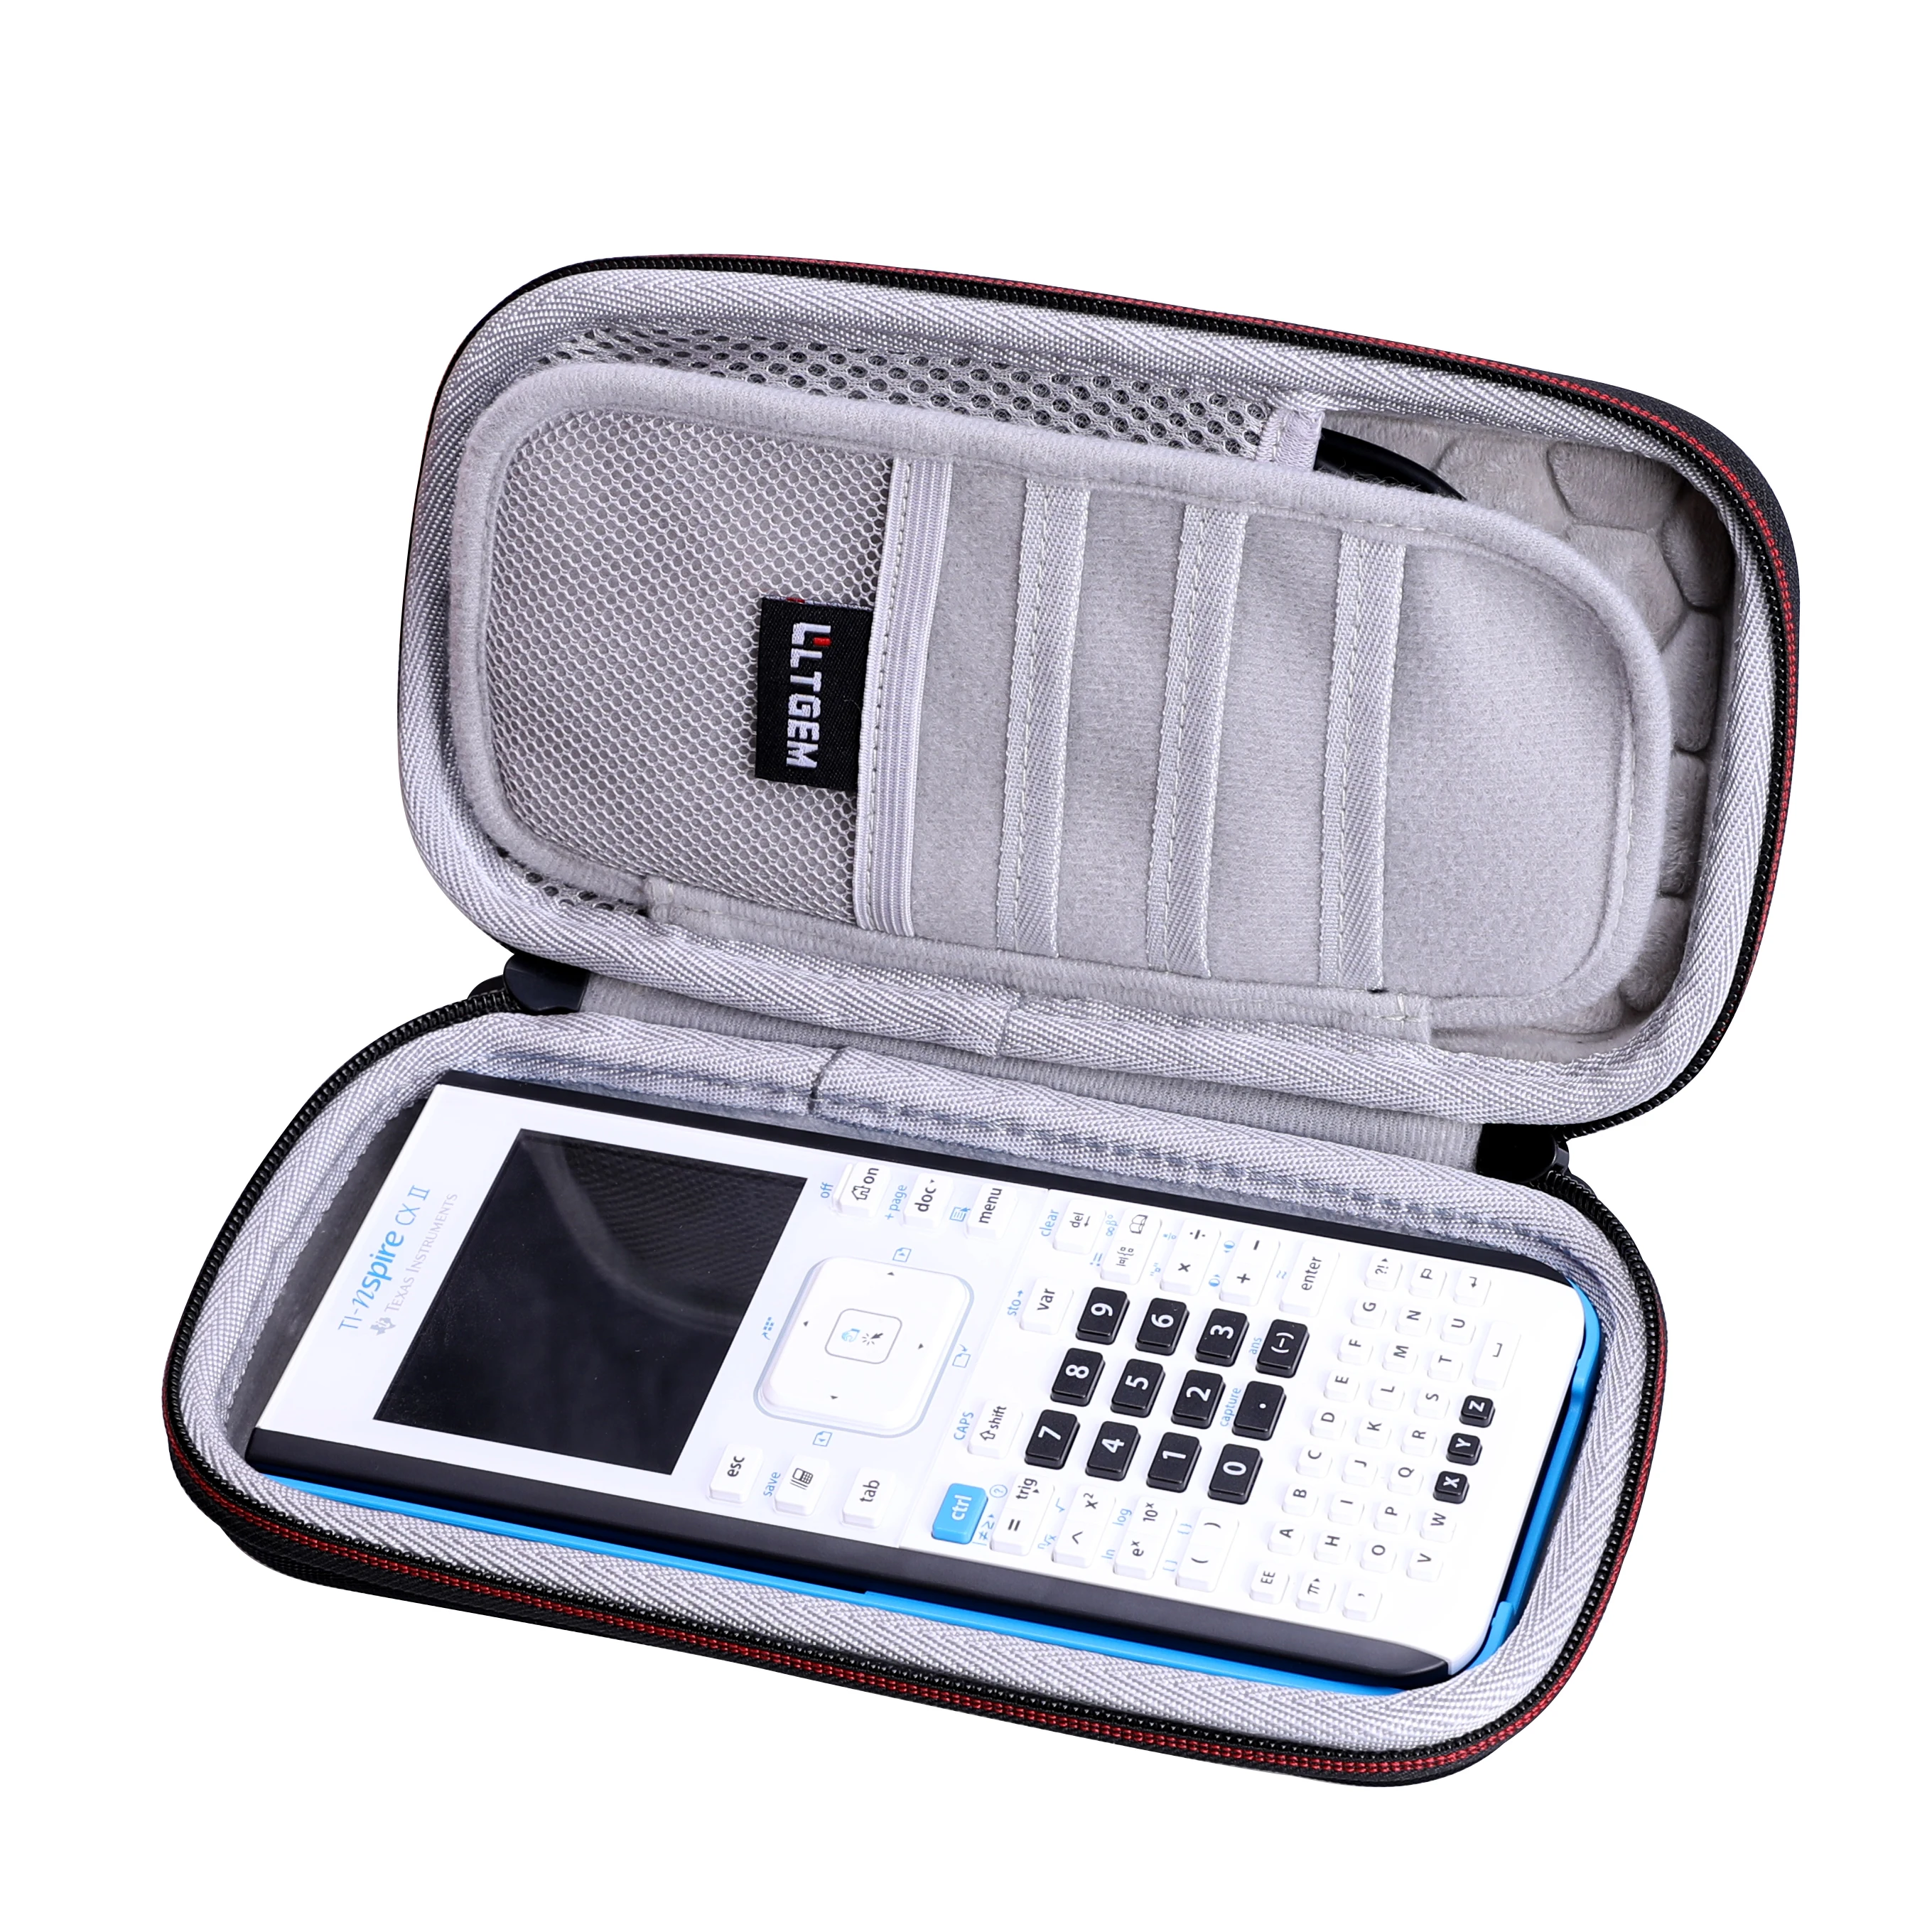 LTGEM Waterproof EVA Hard Case for Texas Instruments TI-Nspire CXII Color Graphing Calculator (PC/Mac)